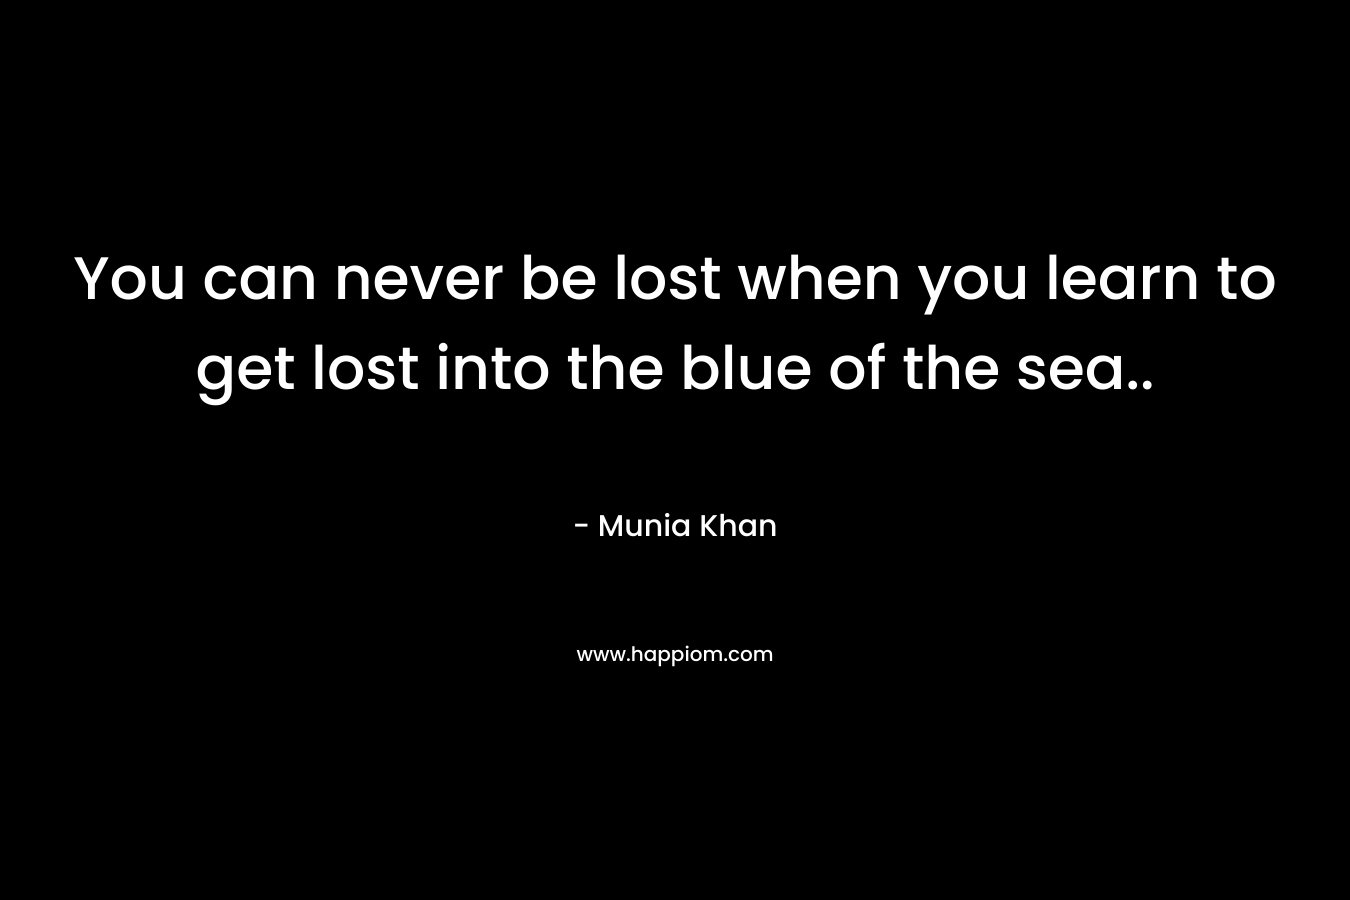 You can never be lost when you learn to get lost into the blue of the sea..